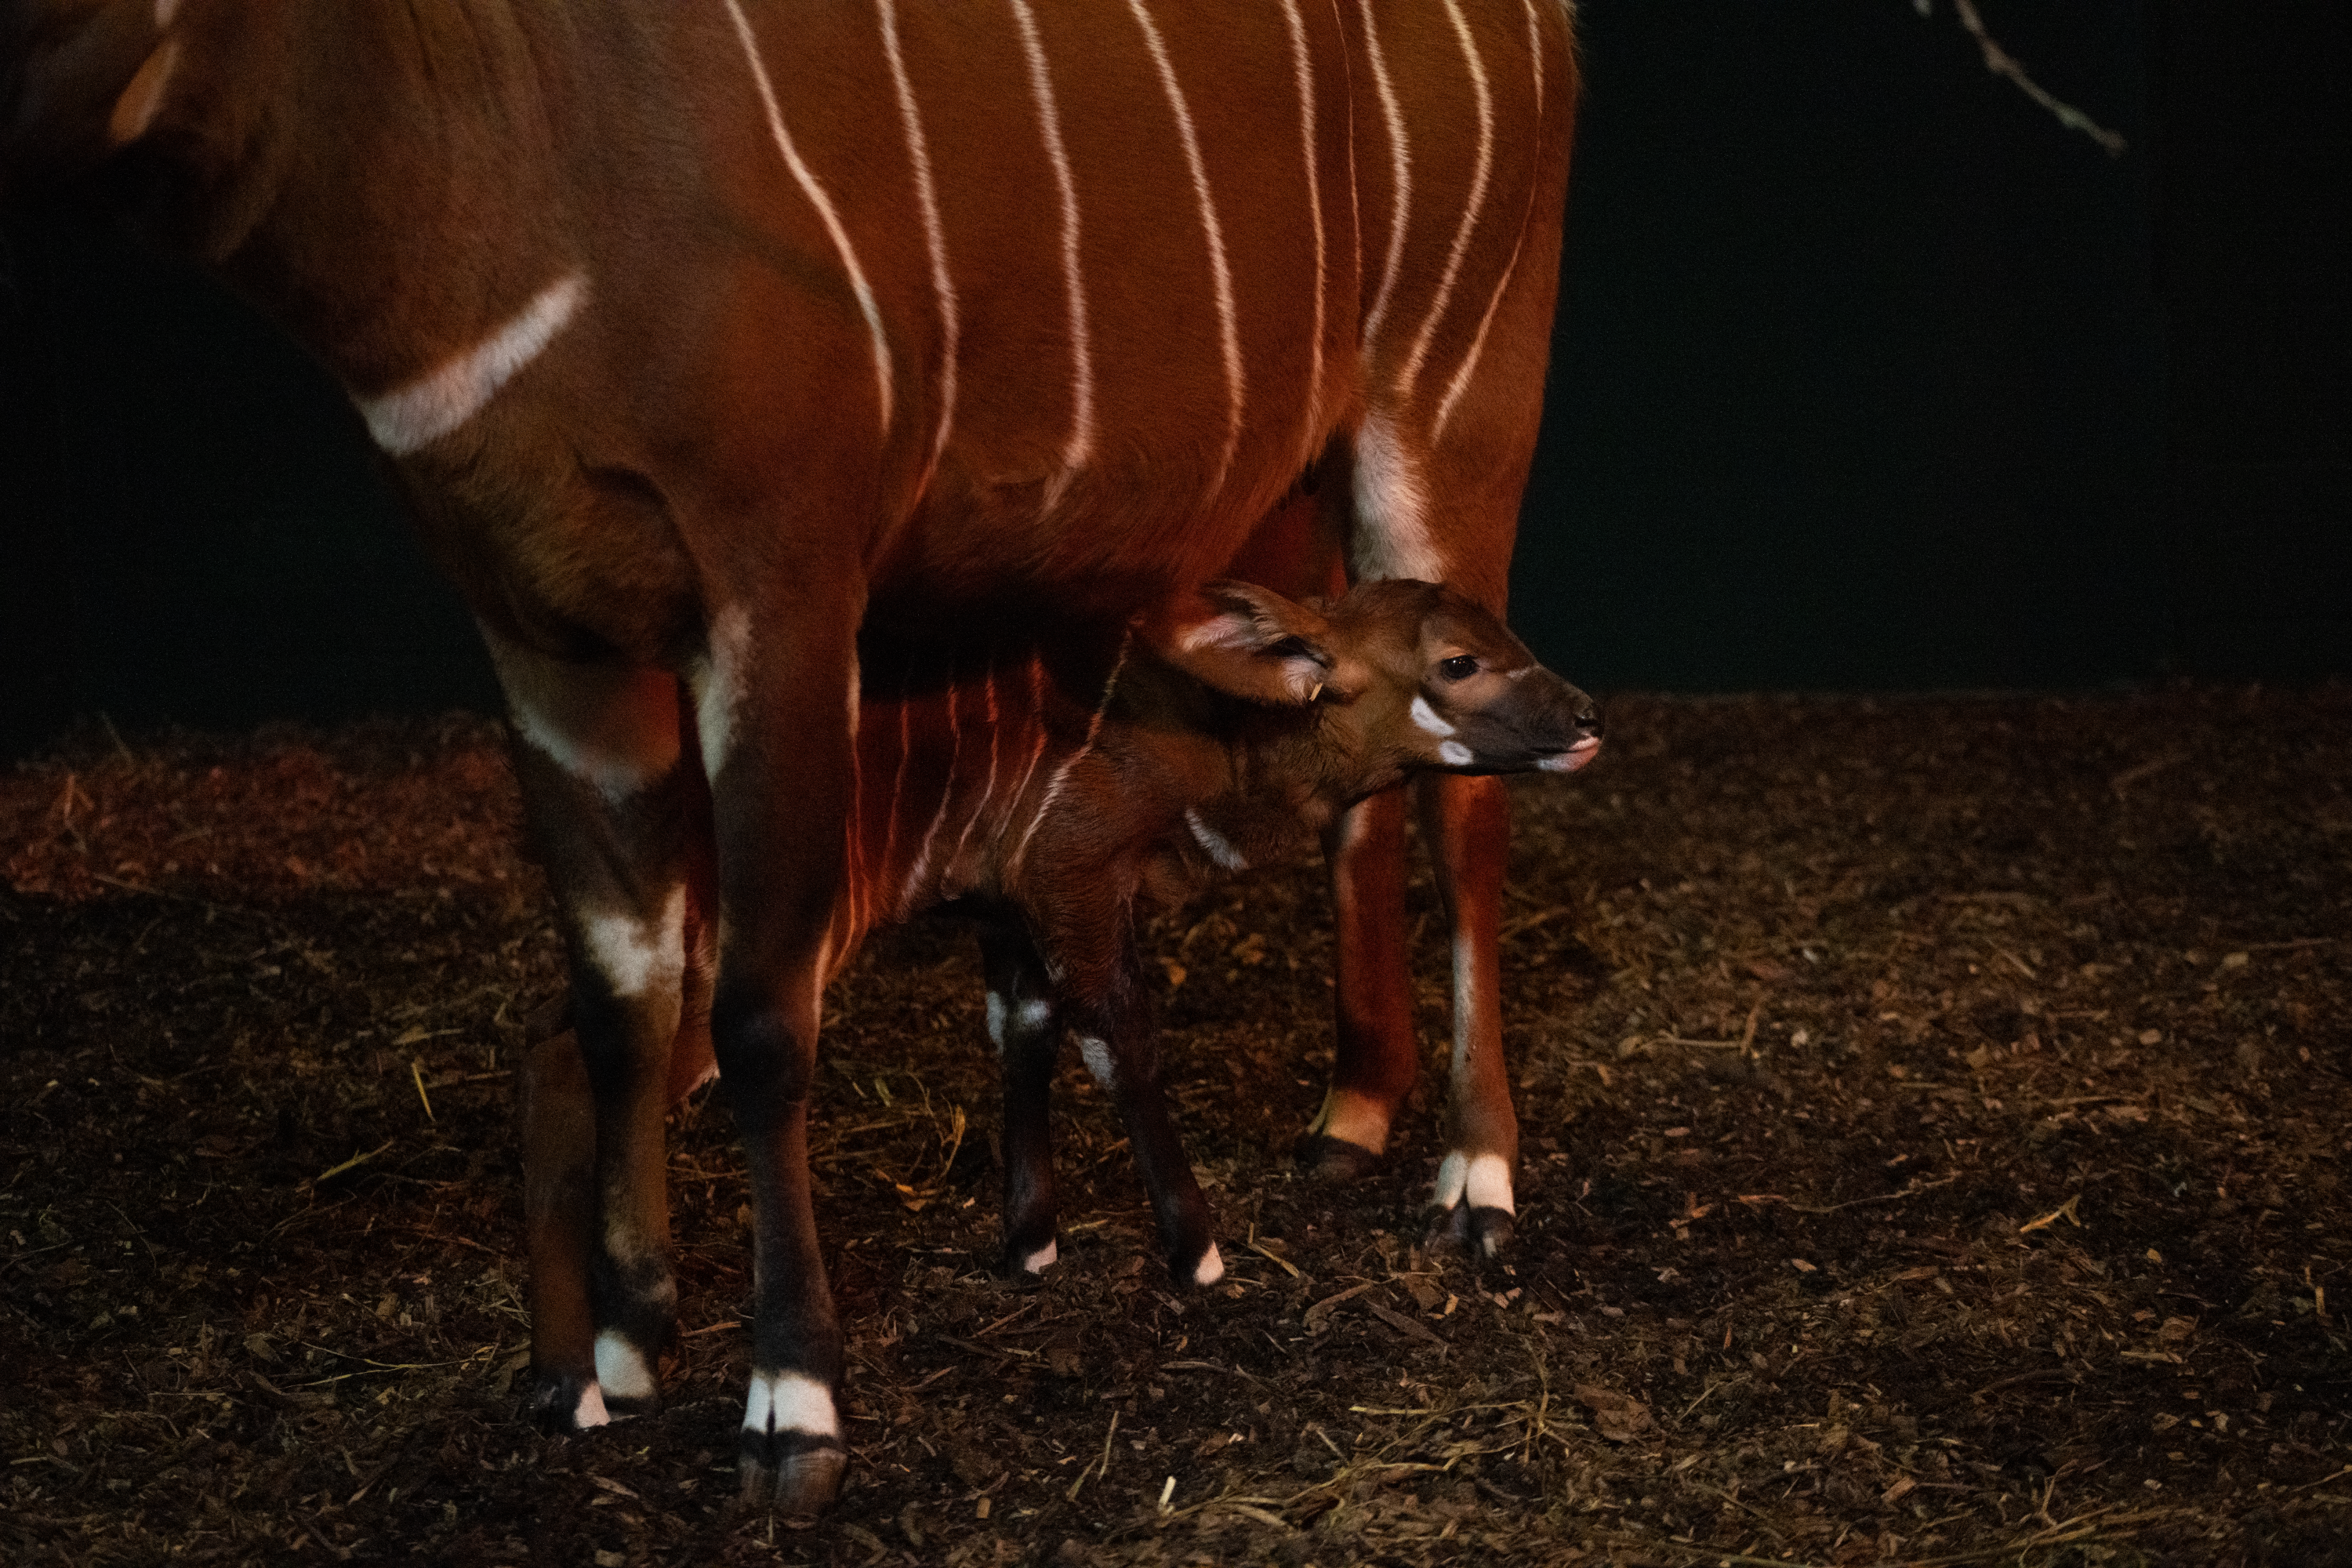 The calf was born to mother Canela (Marwell Wildlife)